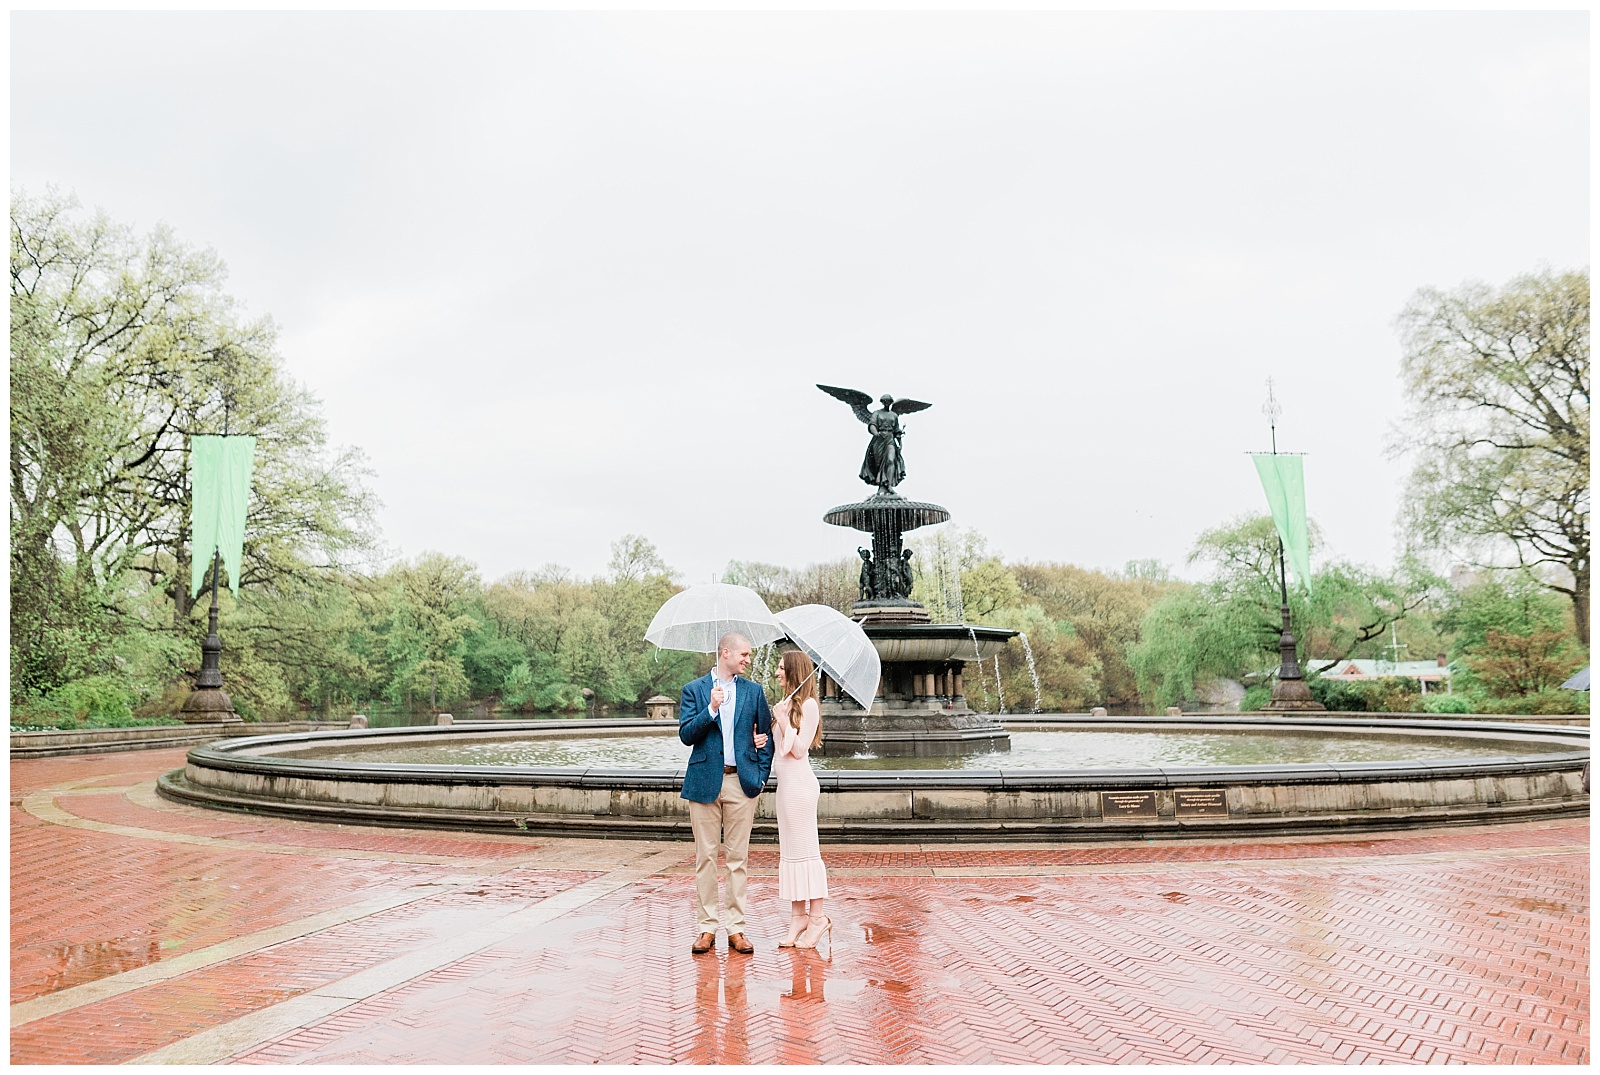 A couple holds hands under umbrellas by the Bethesda Fountain in Central Park.